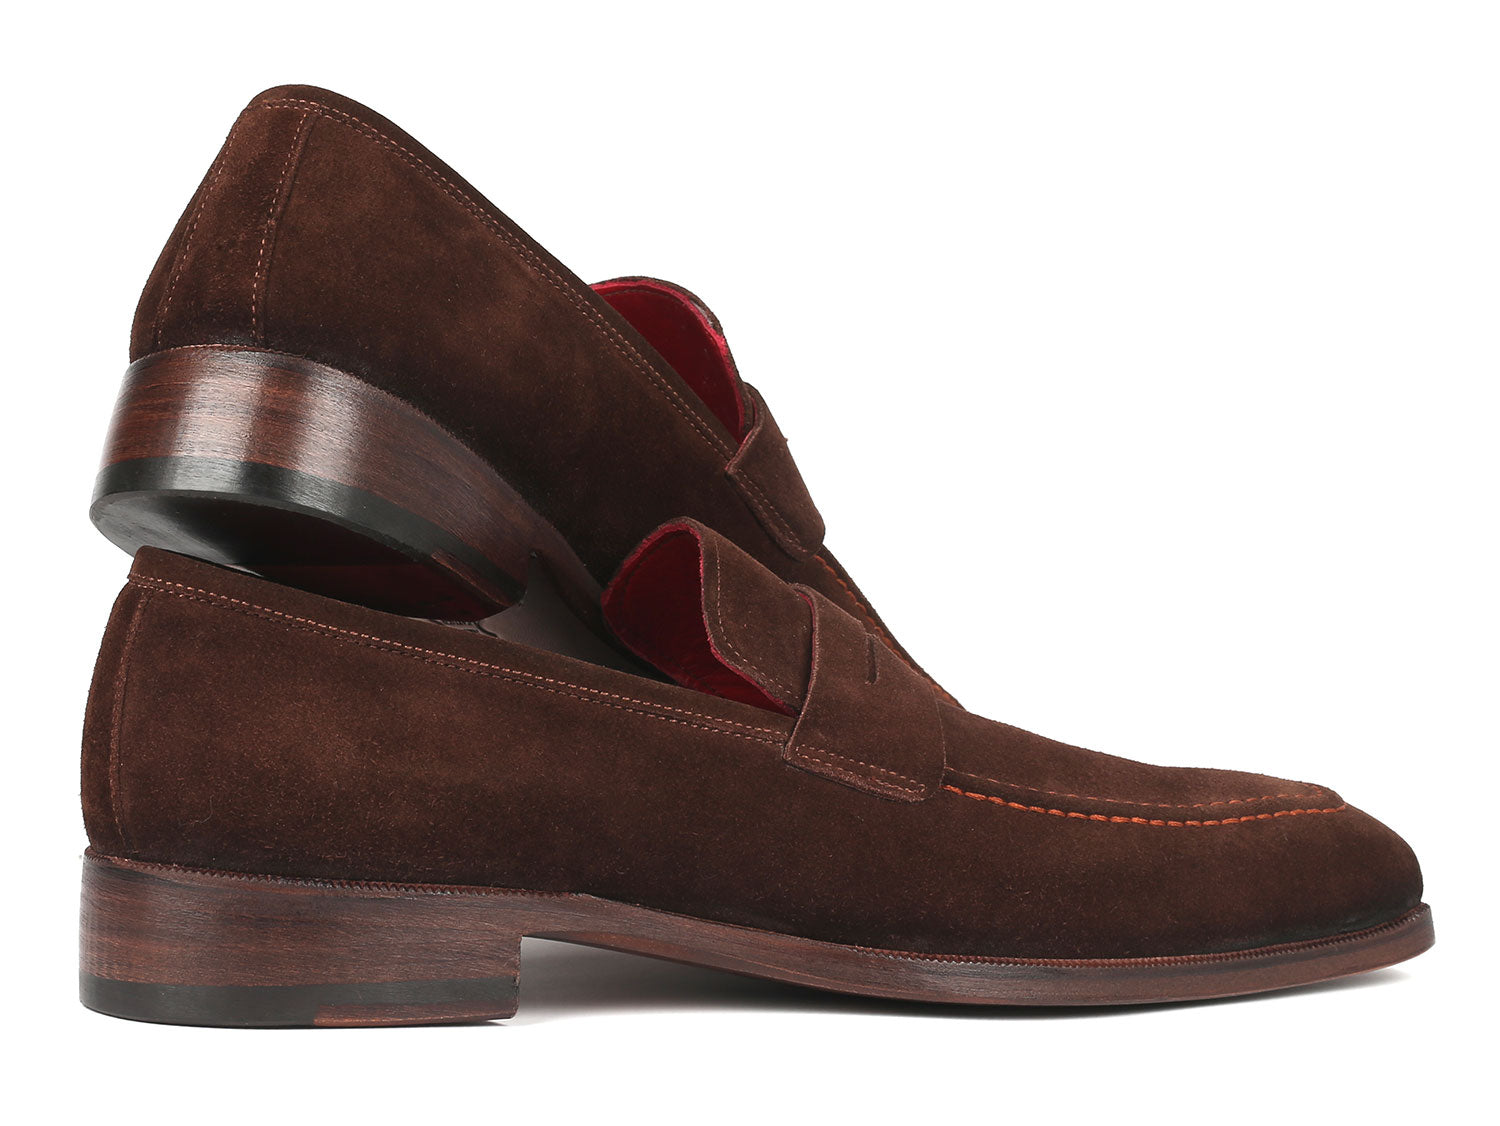 Men's tobacco brown suede leather Penny Loafers